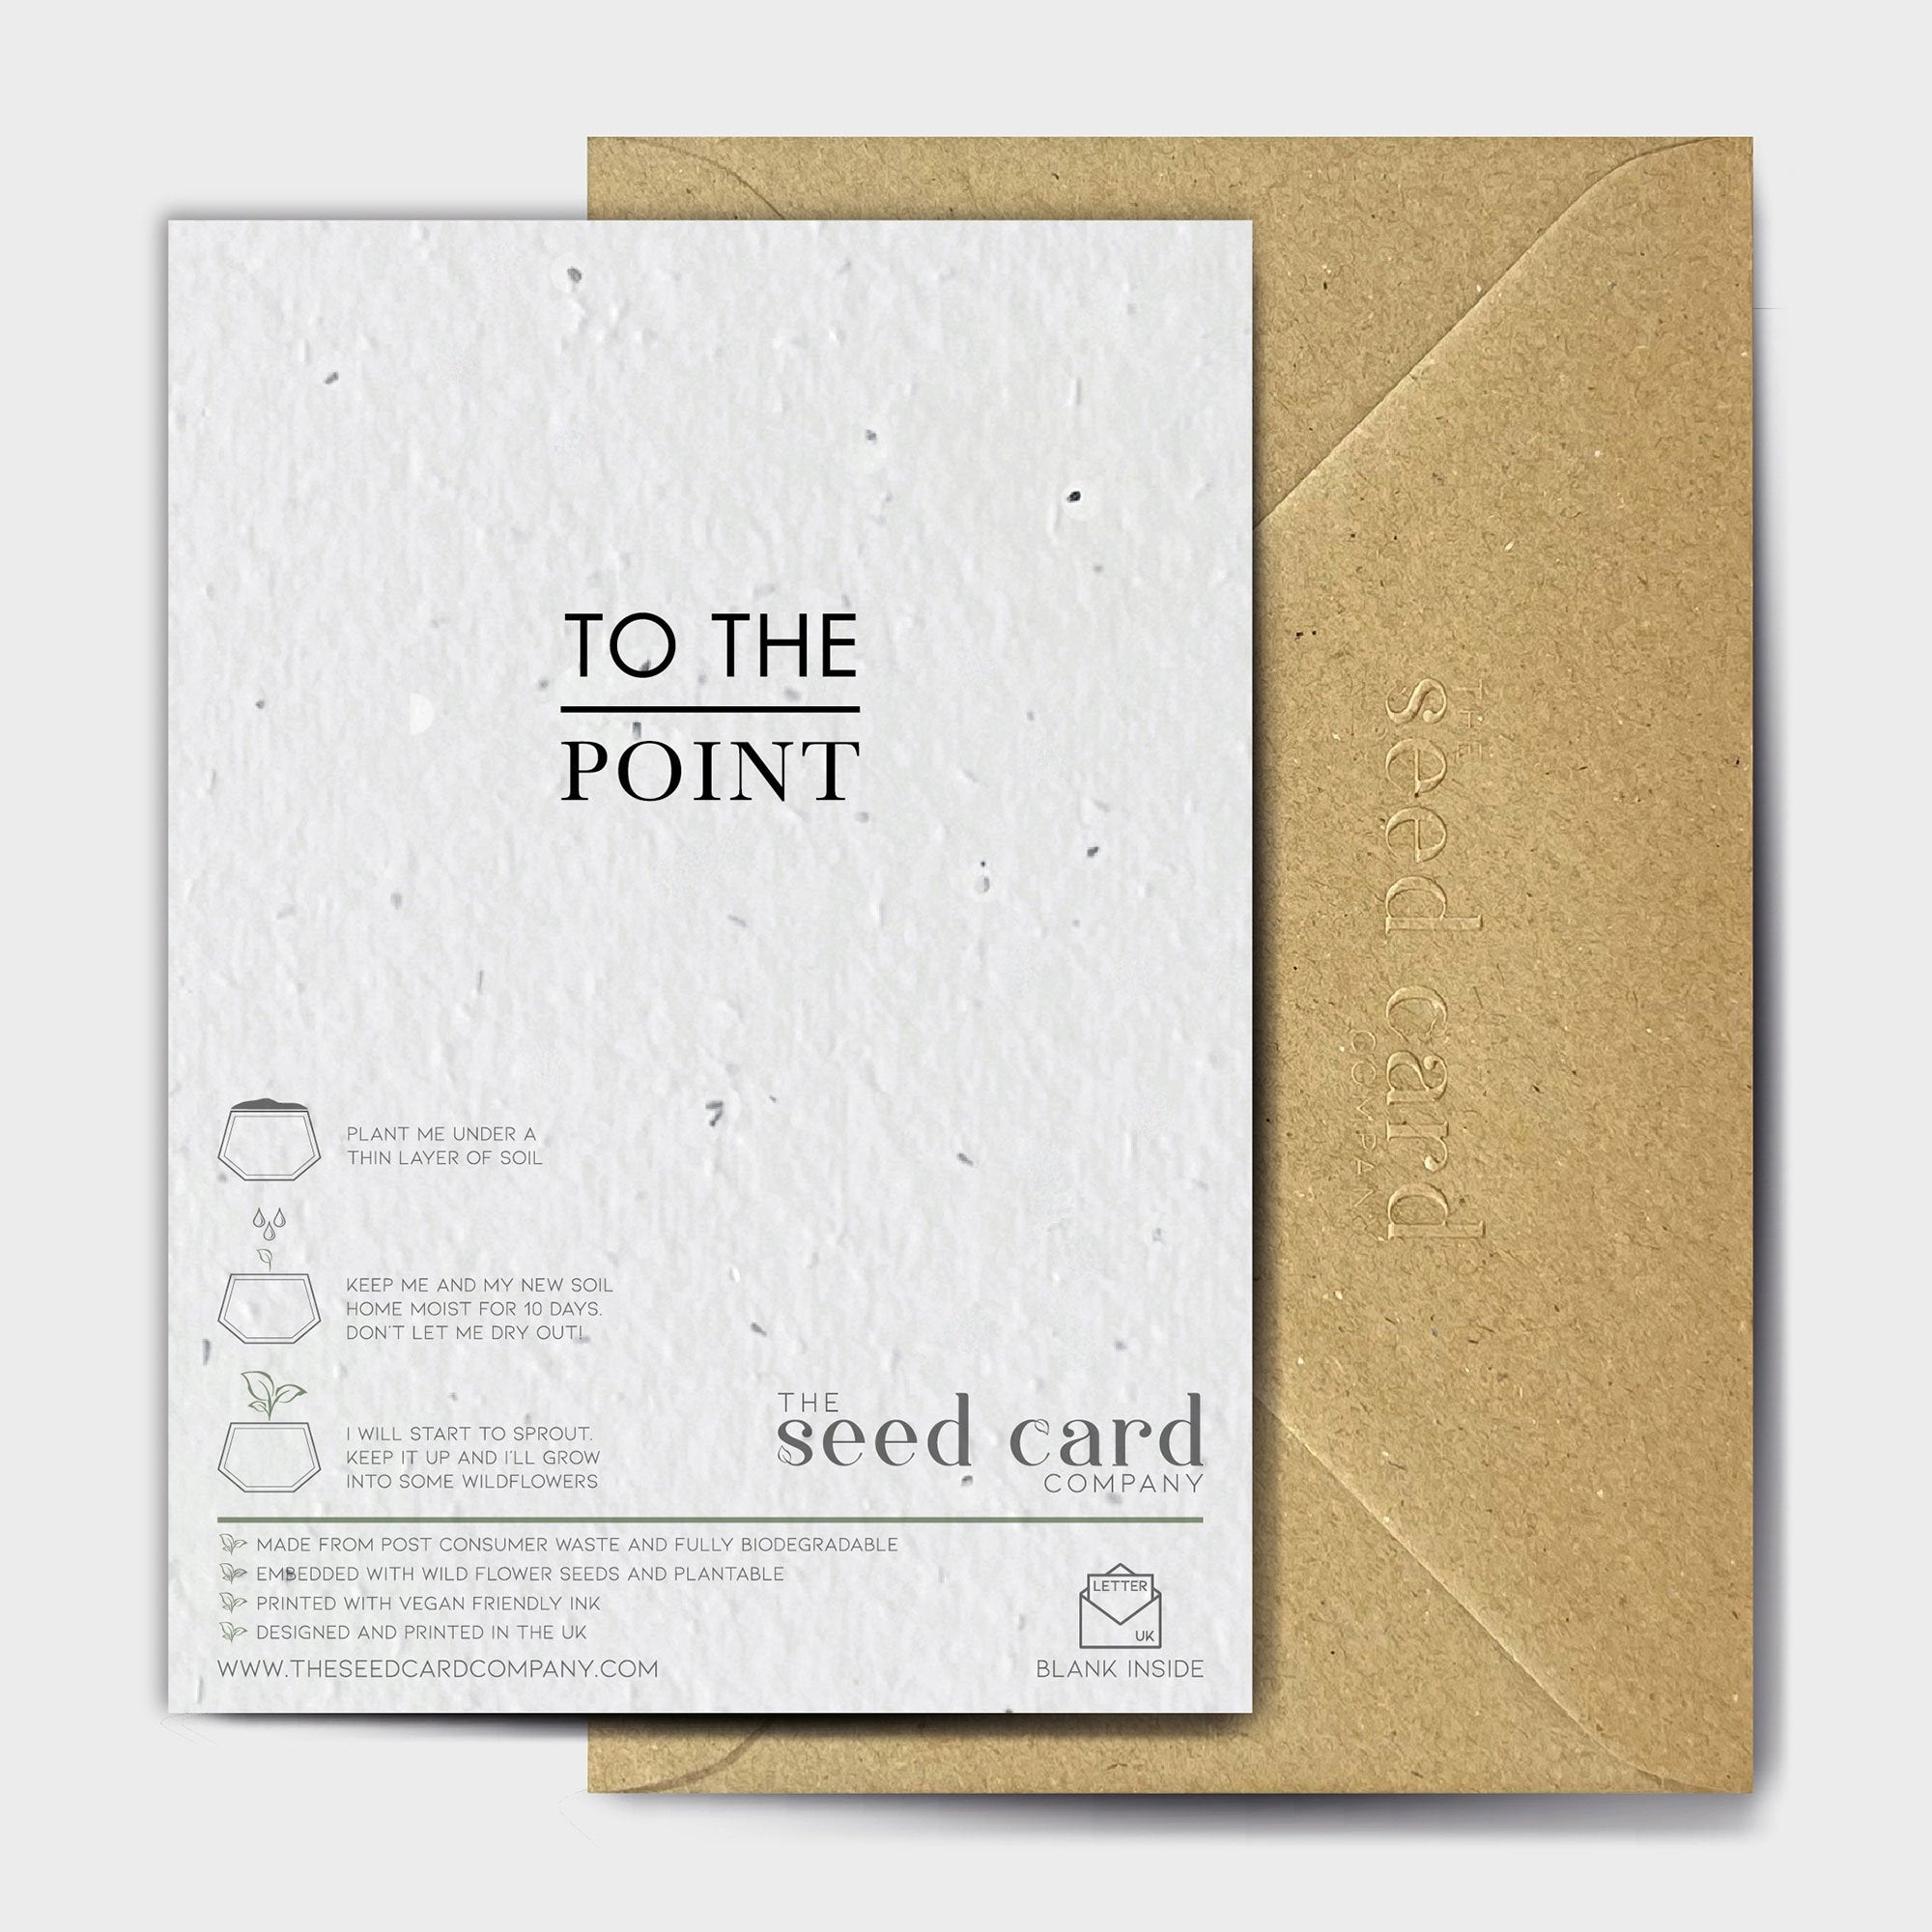 Shop online Dogs Always Win - 100% biodegradable seed-embedded cards Shop -The Seed Card Company